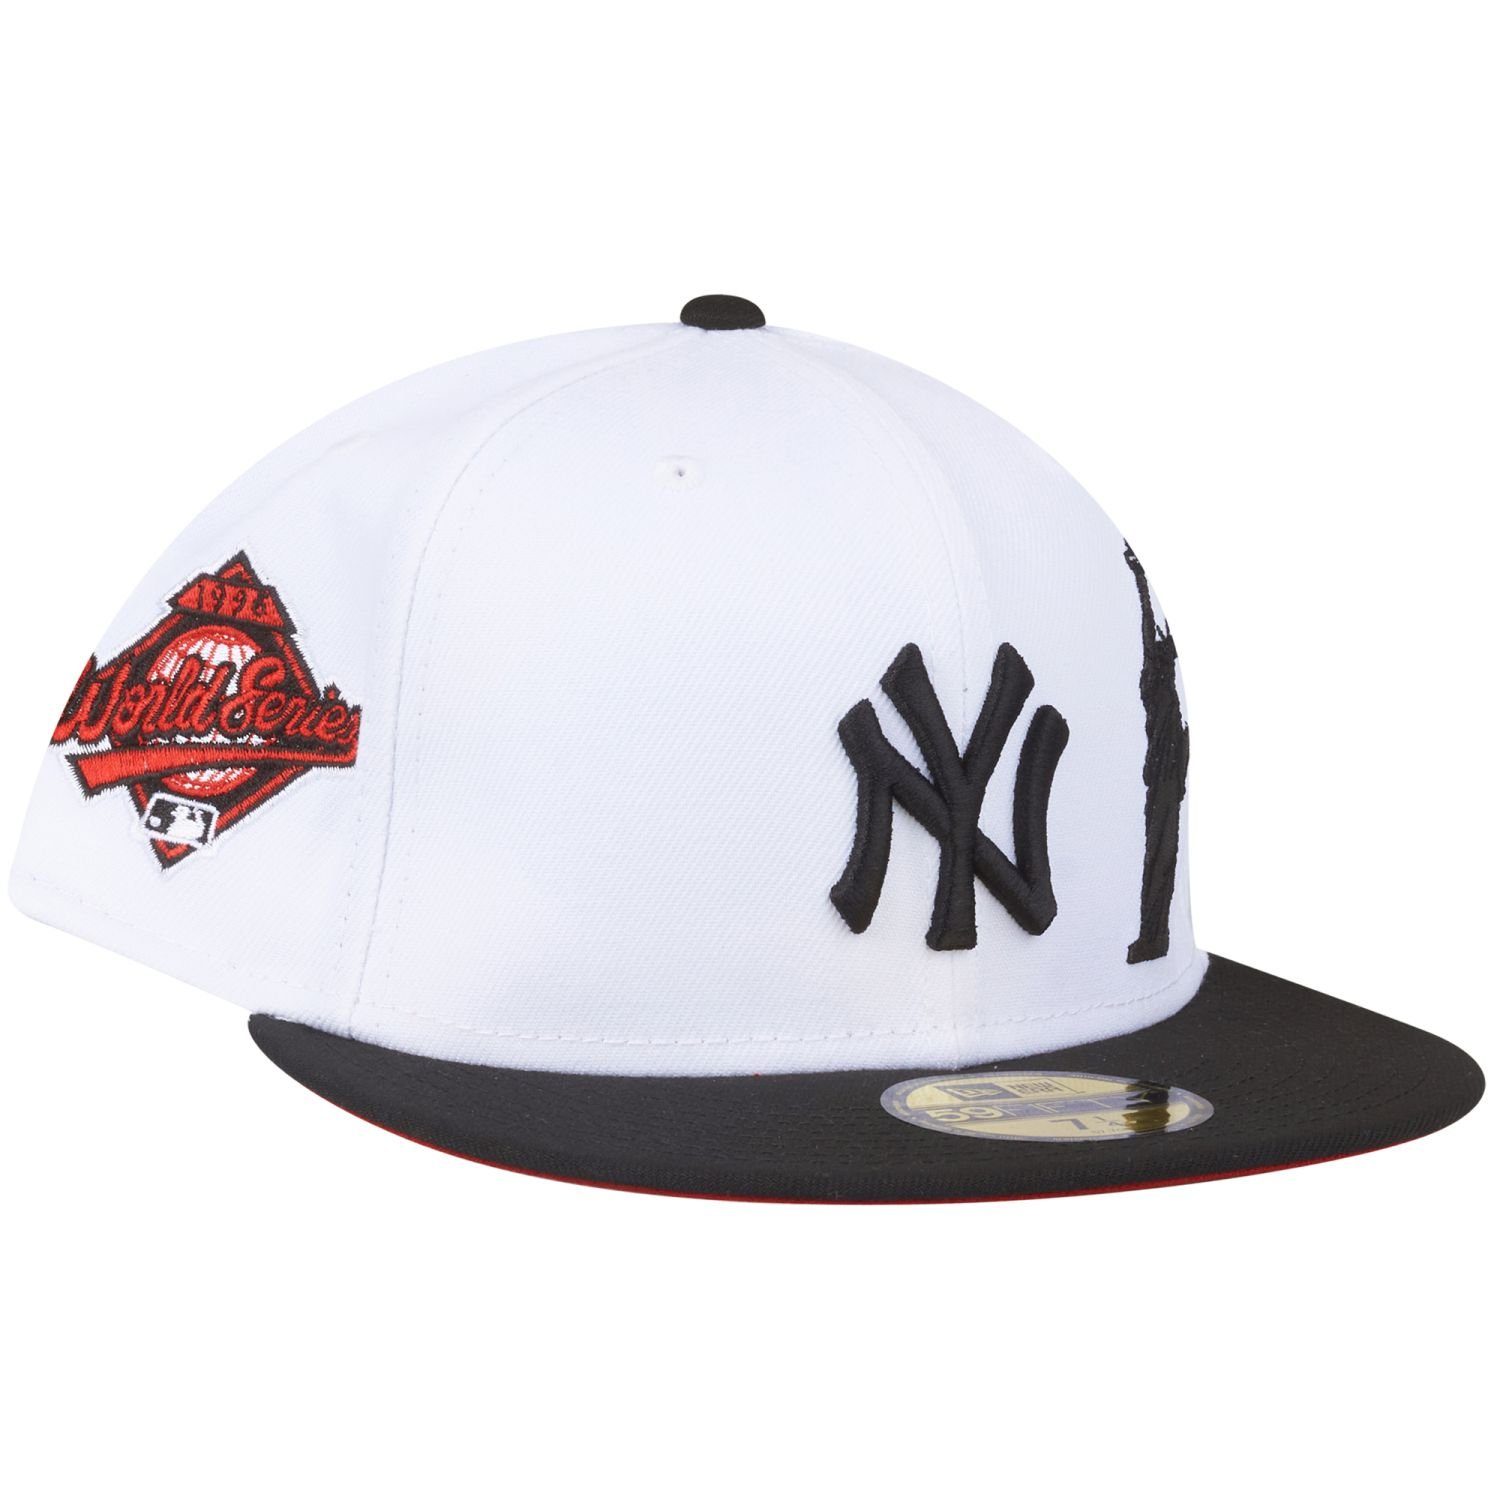 New Era Fitted Cap 59Fifty WORLD SERIES New York Yankees